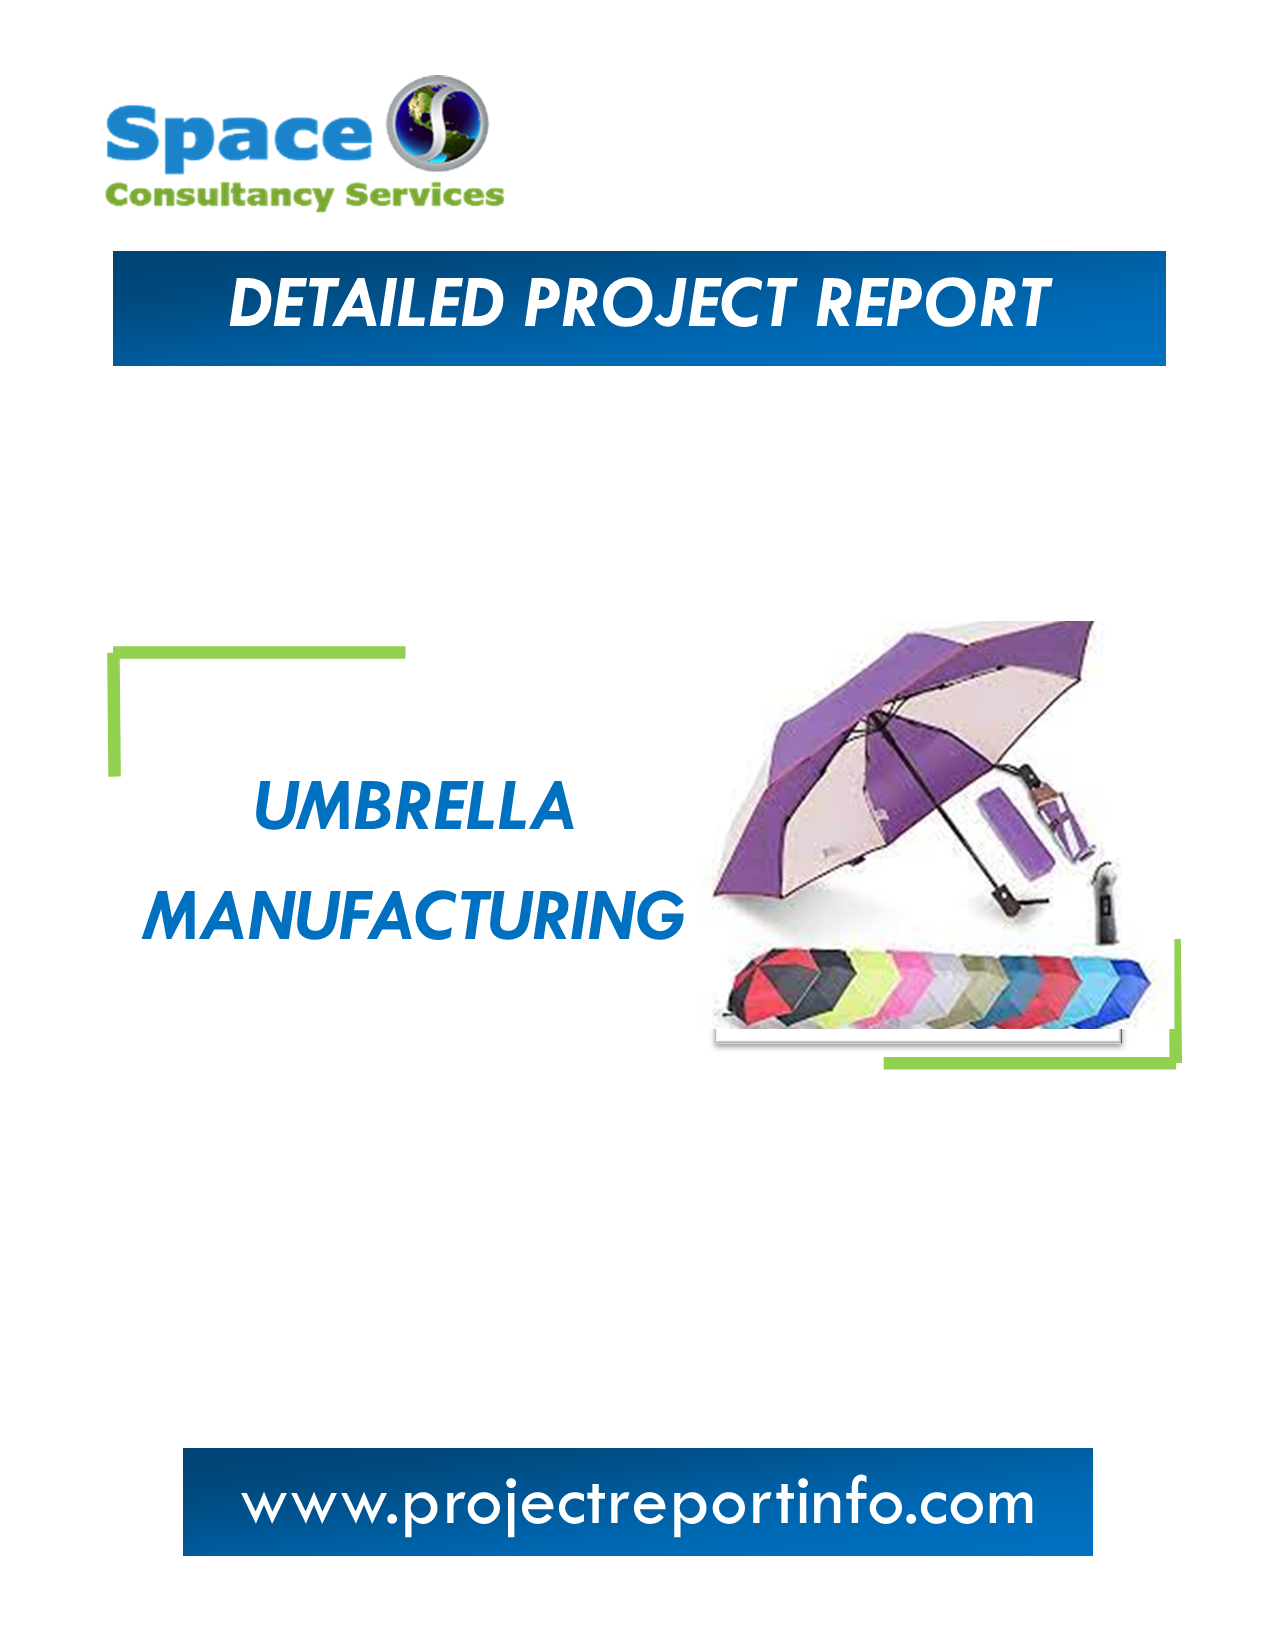 Project Report on Umbrella Manufacturing